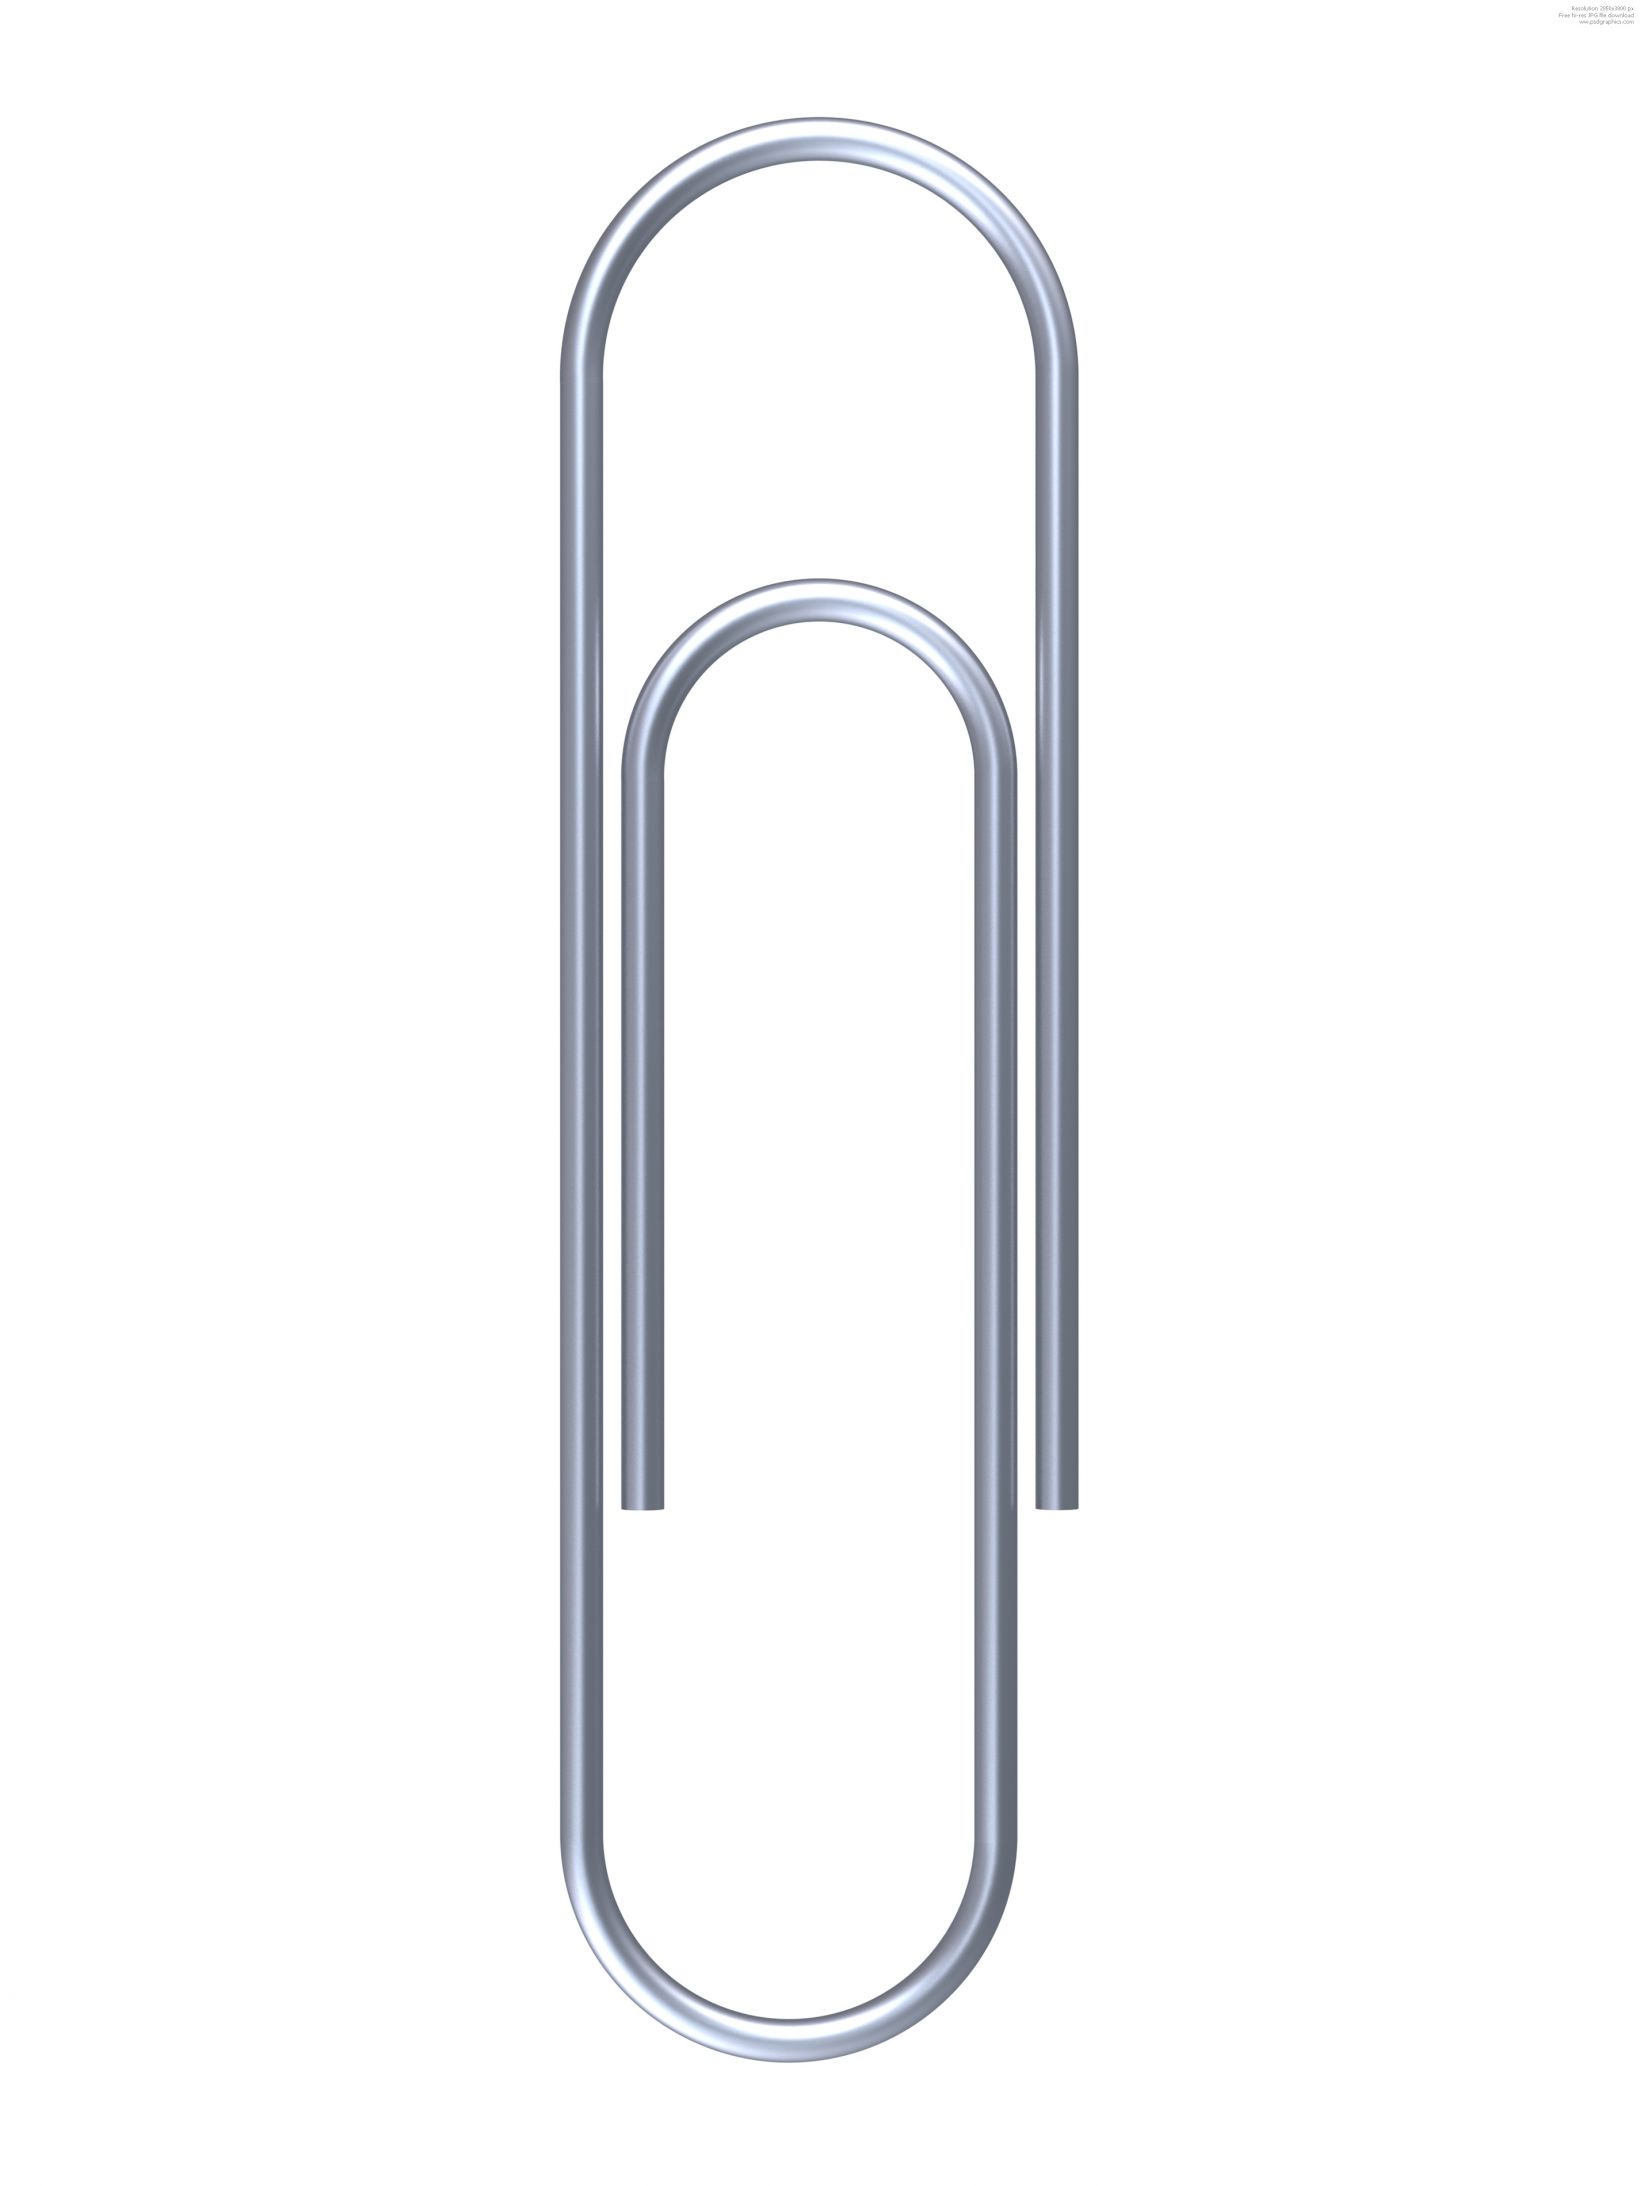 High Quality paper clip Blank Meme Template